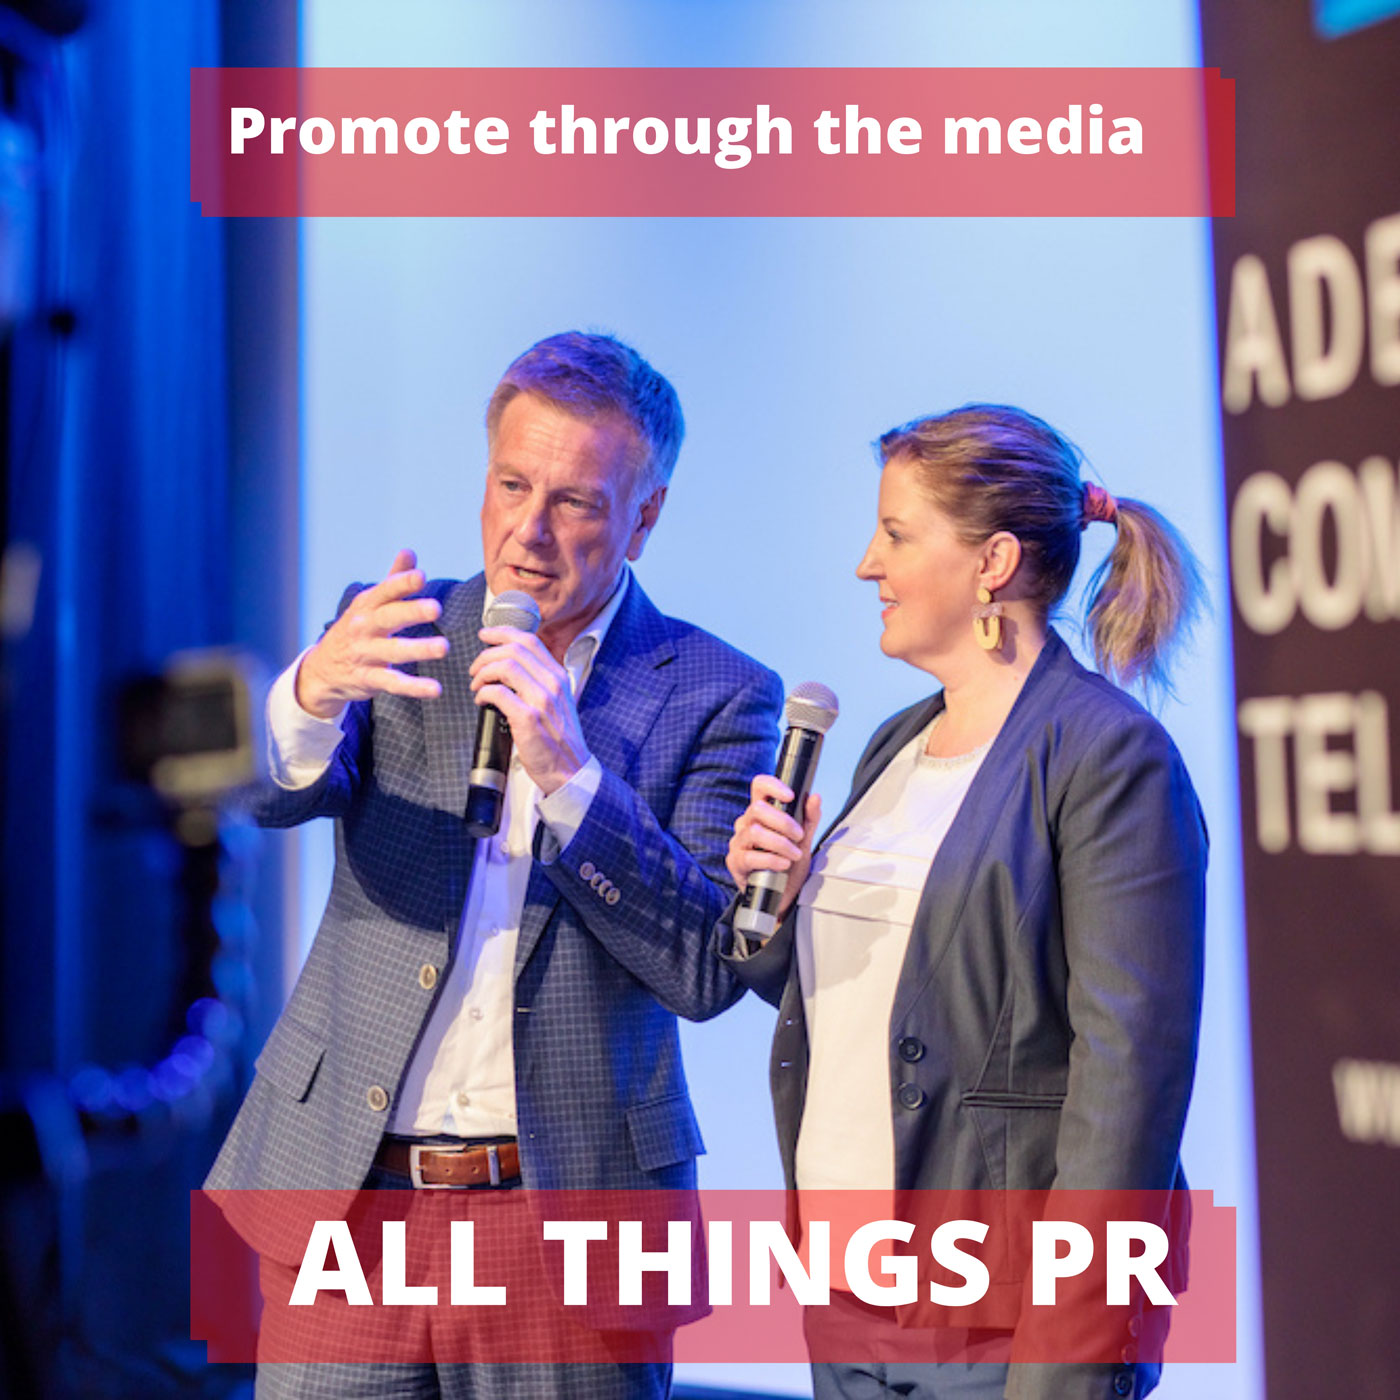 All Things PR is coming soon to the Auscast Network